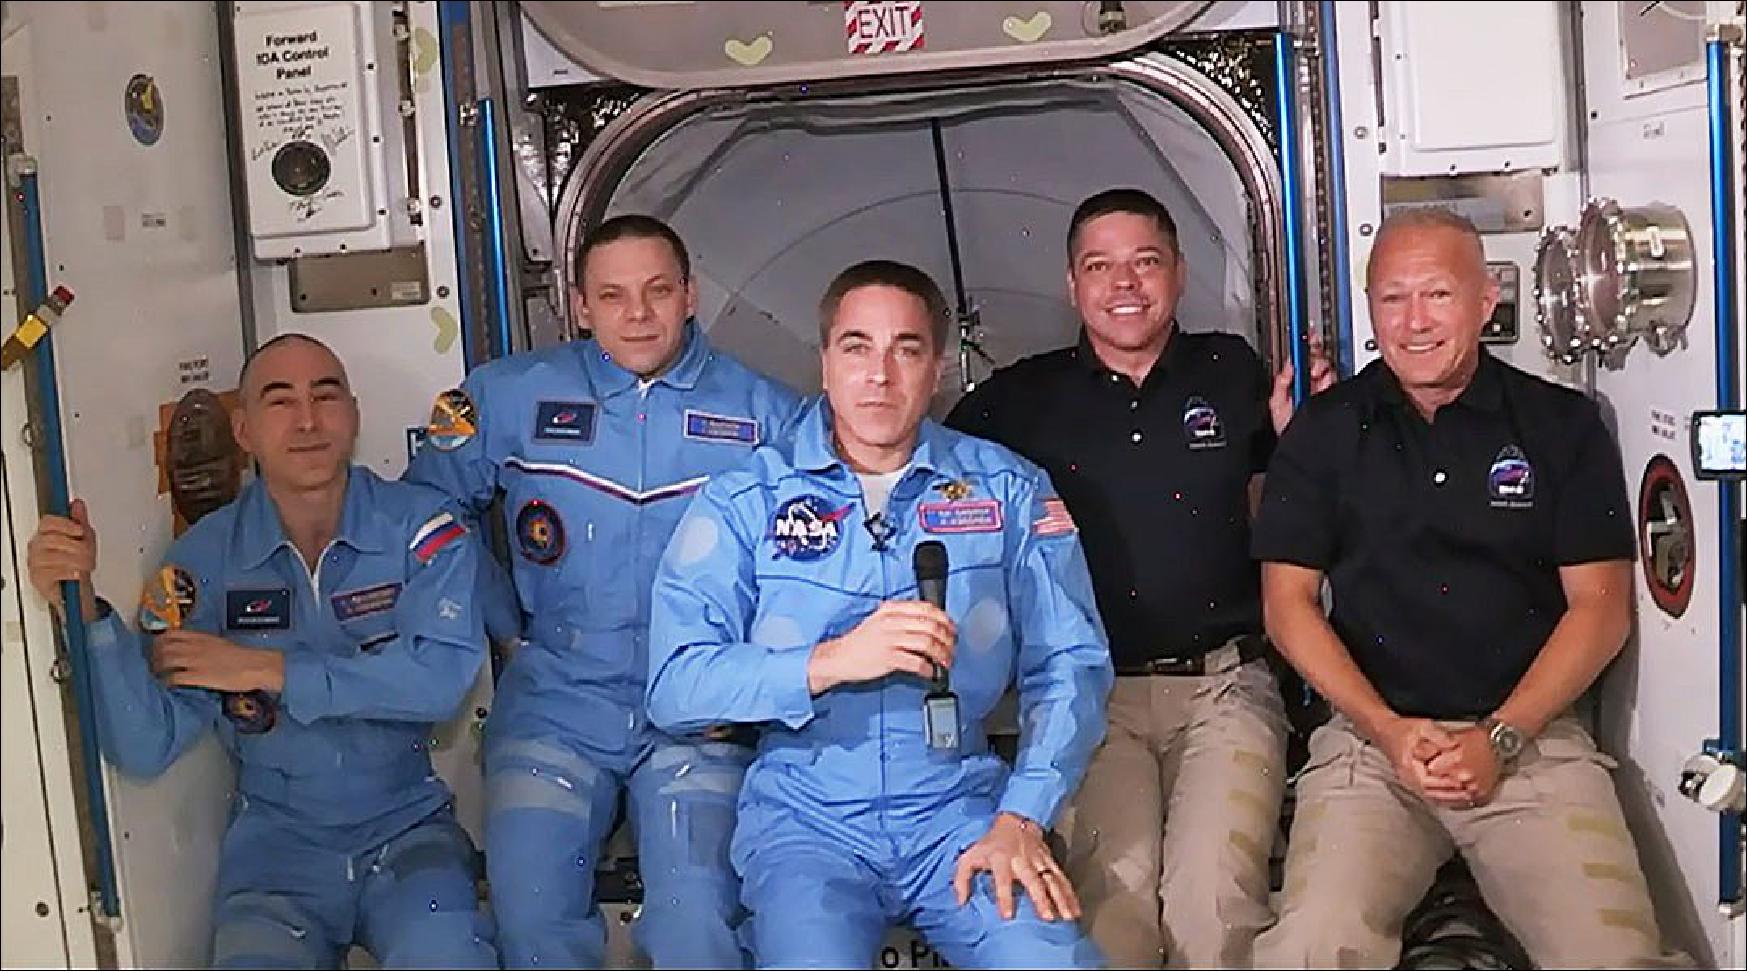 Figure 17: Behnken and Hurley, (at the right) the first astronauts to fly to SpaceX’s Crew Dragon to the station, were welcomed as crew members of Expedition 63 by fellow NASA astronaut Chris Cassidy and two Russian cosmonauts Anatoly Ivanishin and Ivan Vagner. “The whole world saw this mission, and we are so, so proud of everything you’ve done for our country and, in fact, to inspire the world," NASA Administrator Jim Bridenstine told the crew from the floor of Mission Control in Houston. “This represents a transition in how we do spaceflight from the United States of America. NASA is not going to purchase, own and operate rockets and capsules the way we used to; we’re going to partner with commercial industry (image credit: NASA, Bill Stafford)